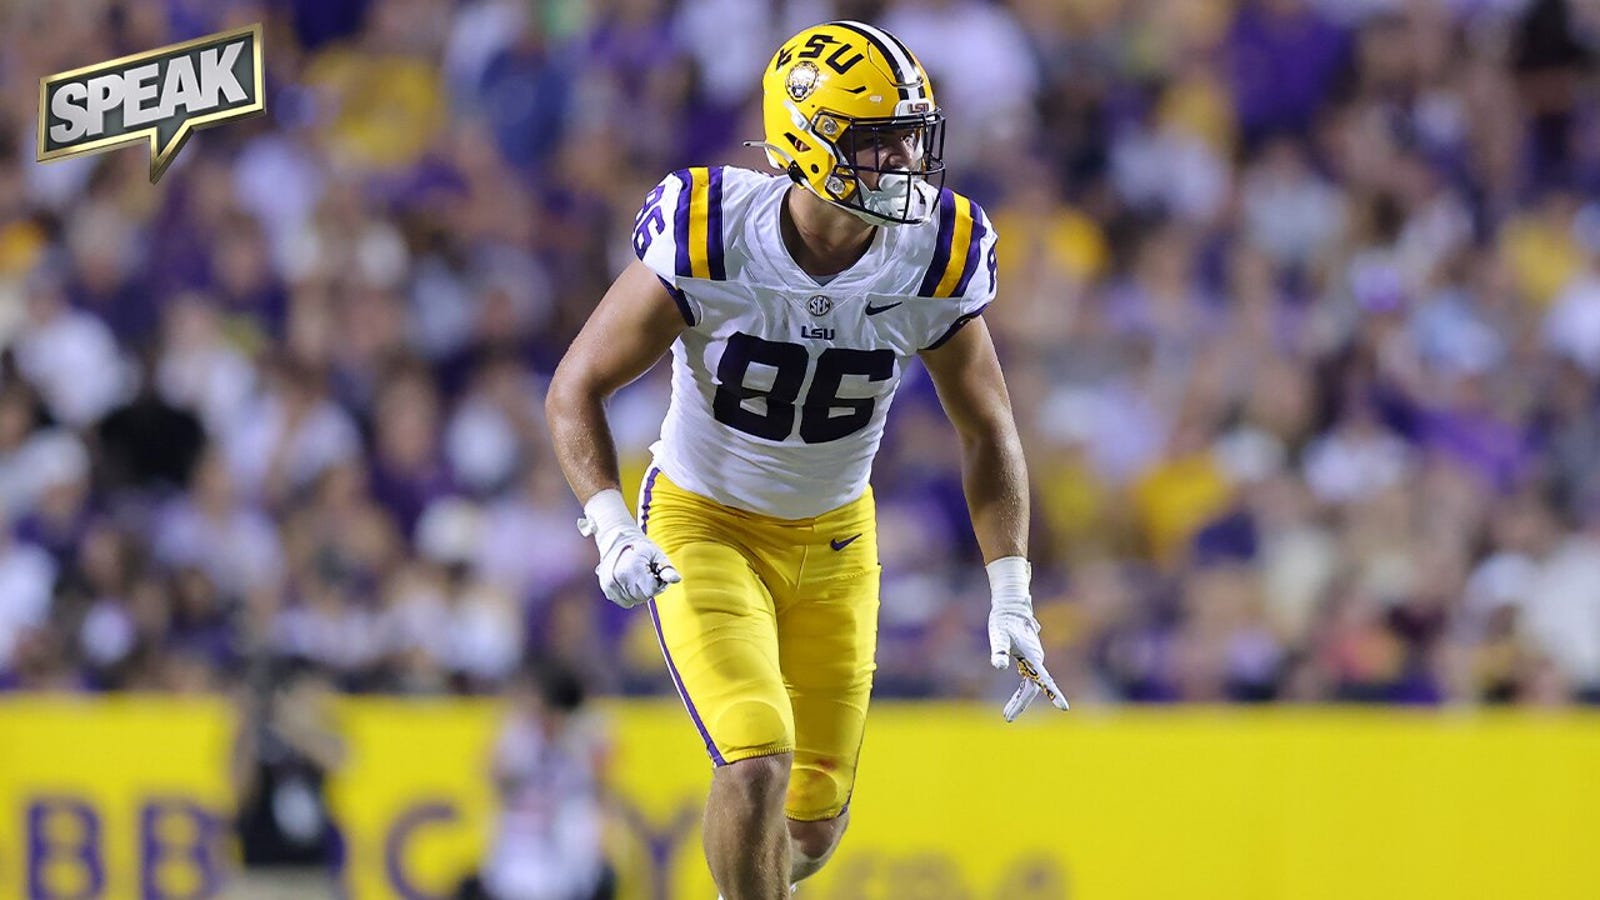 LSU's Mason Taylor catches GW two-point conversion to upset Alabama